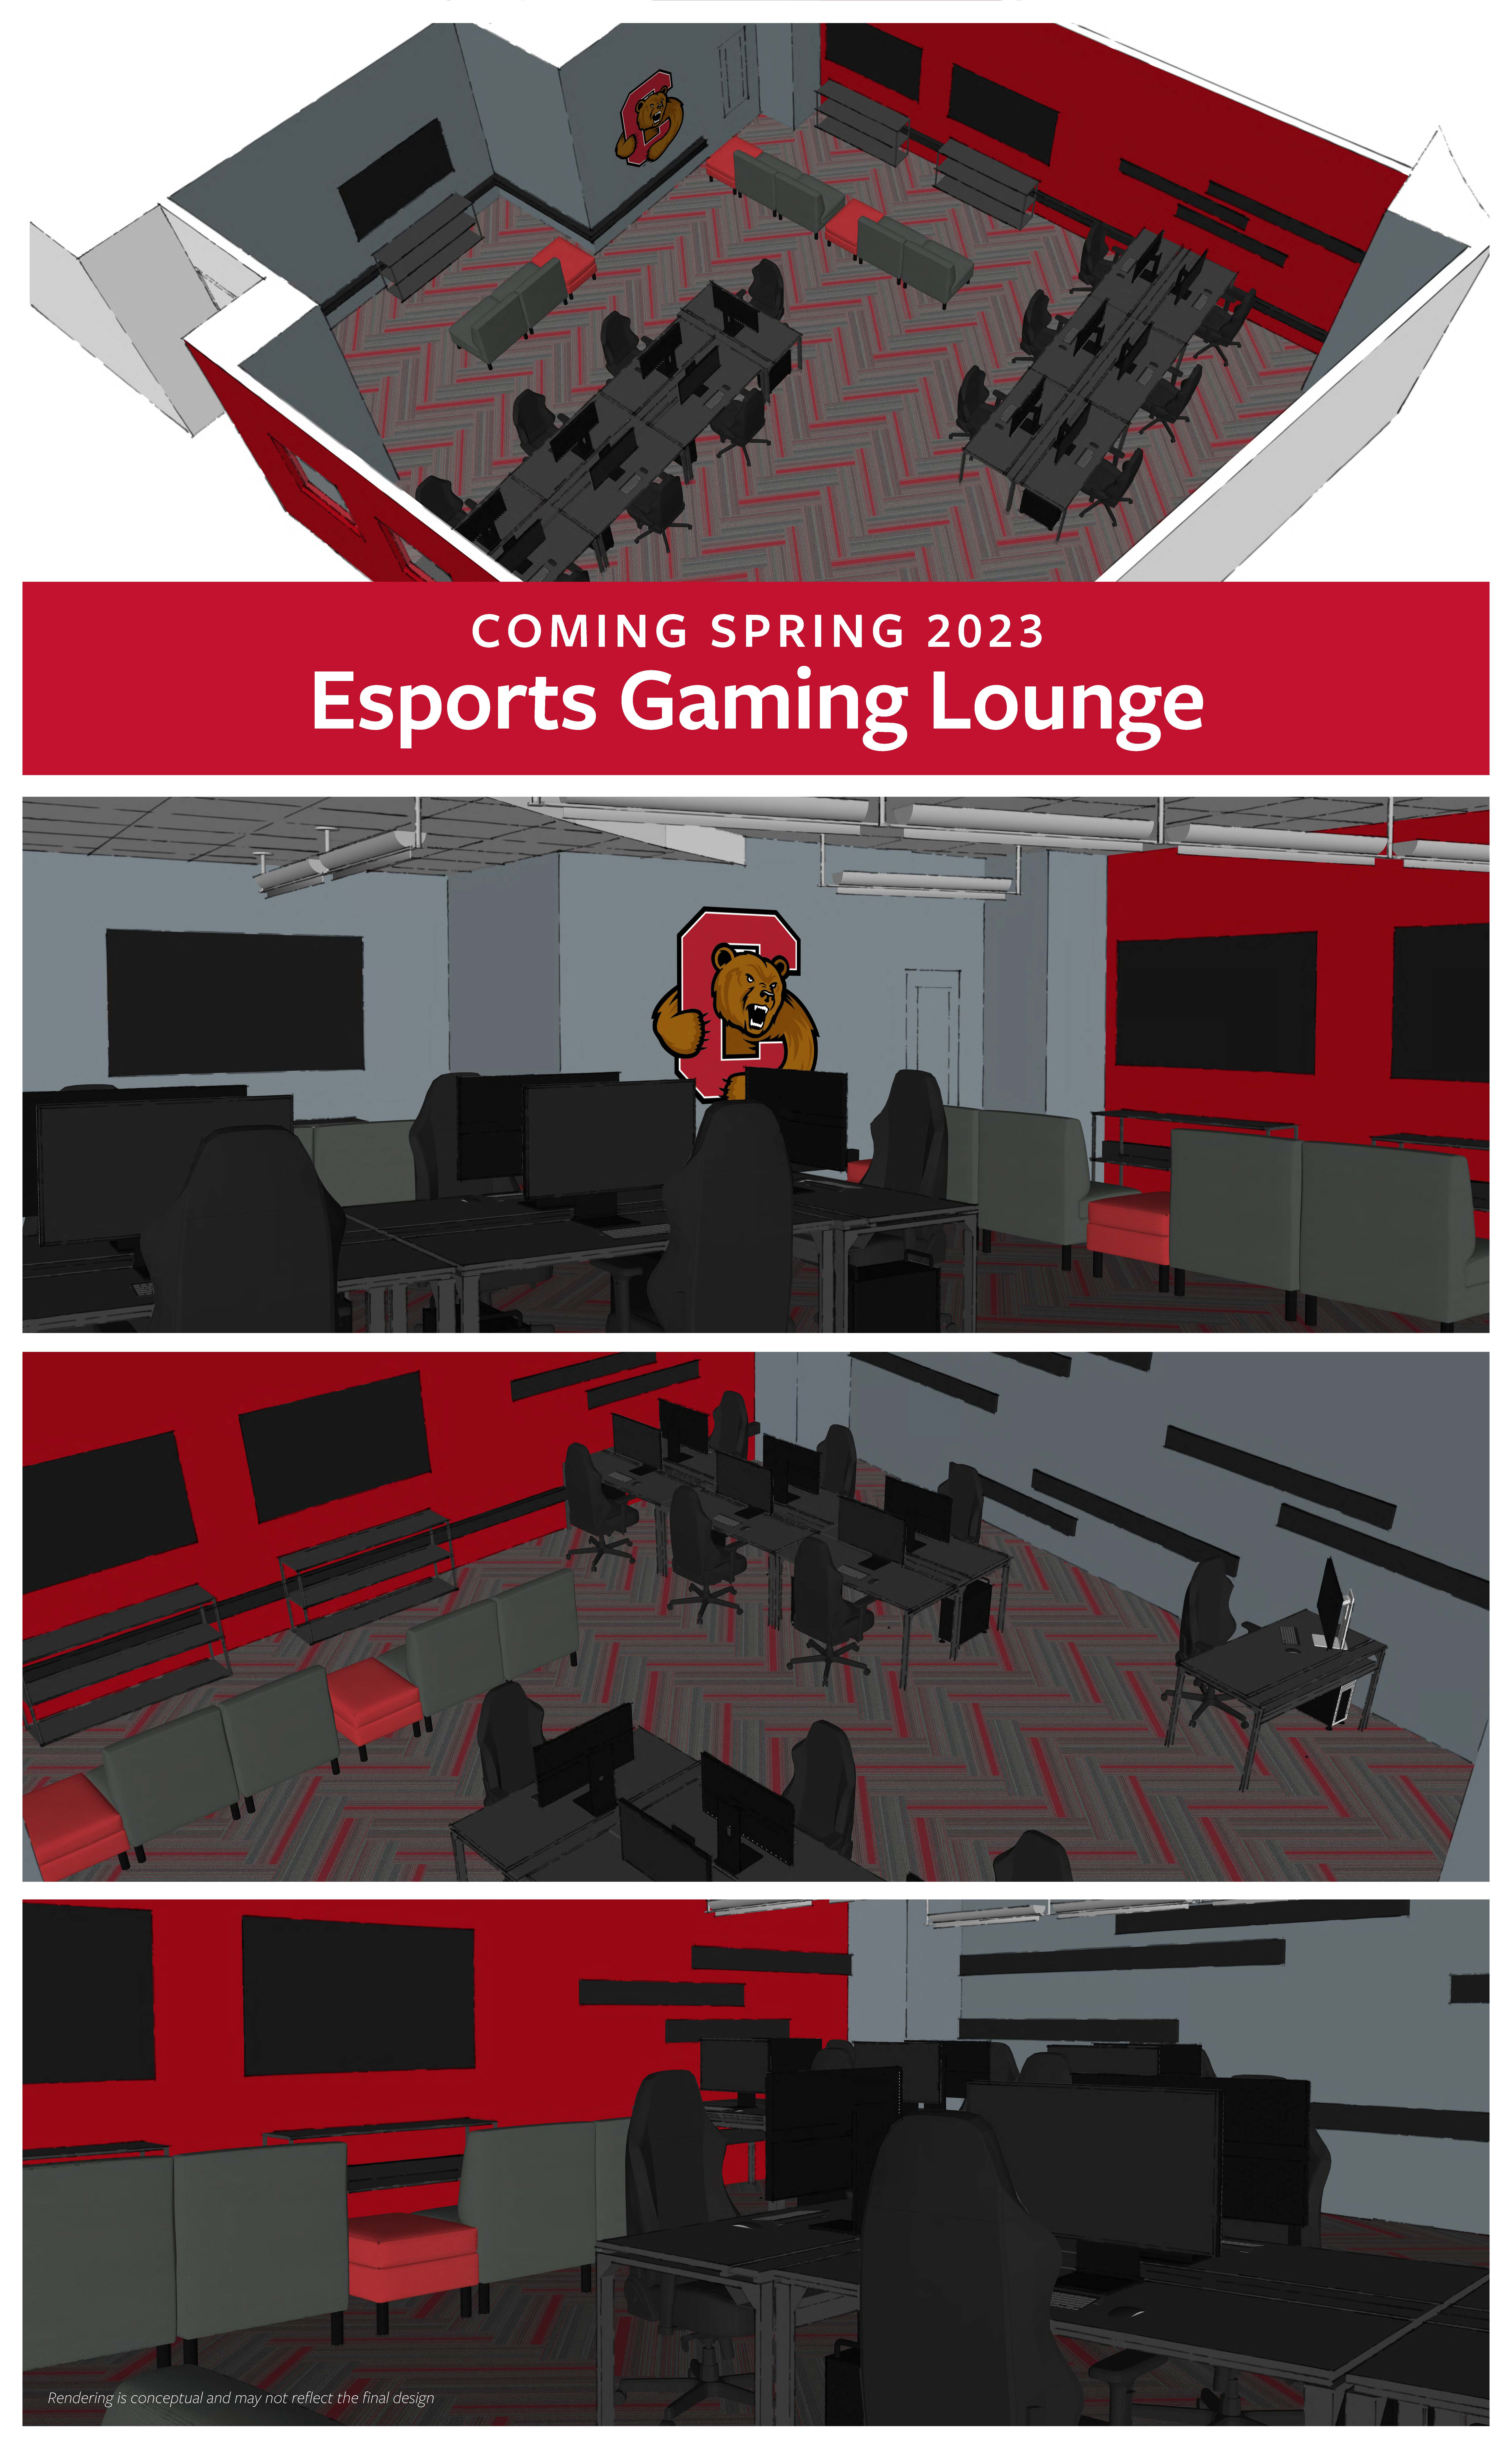 Esports Gaming Lounge featuring concept drawings of the room with chairs, computers, and room features.